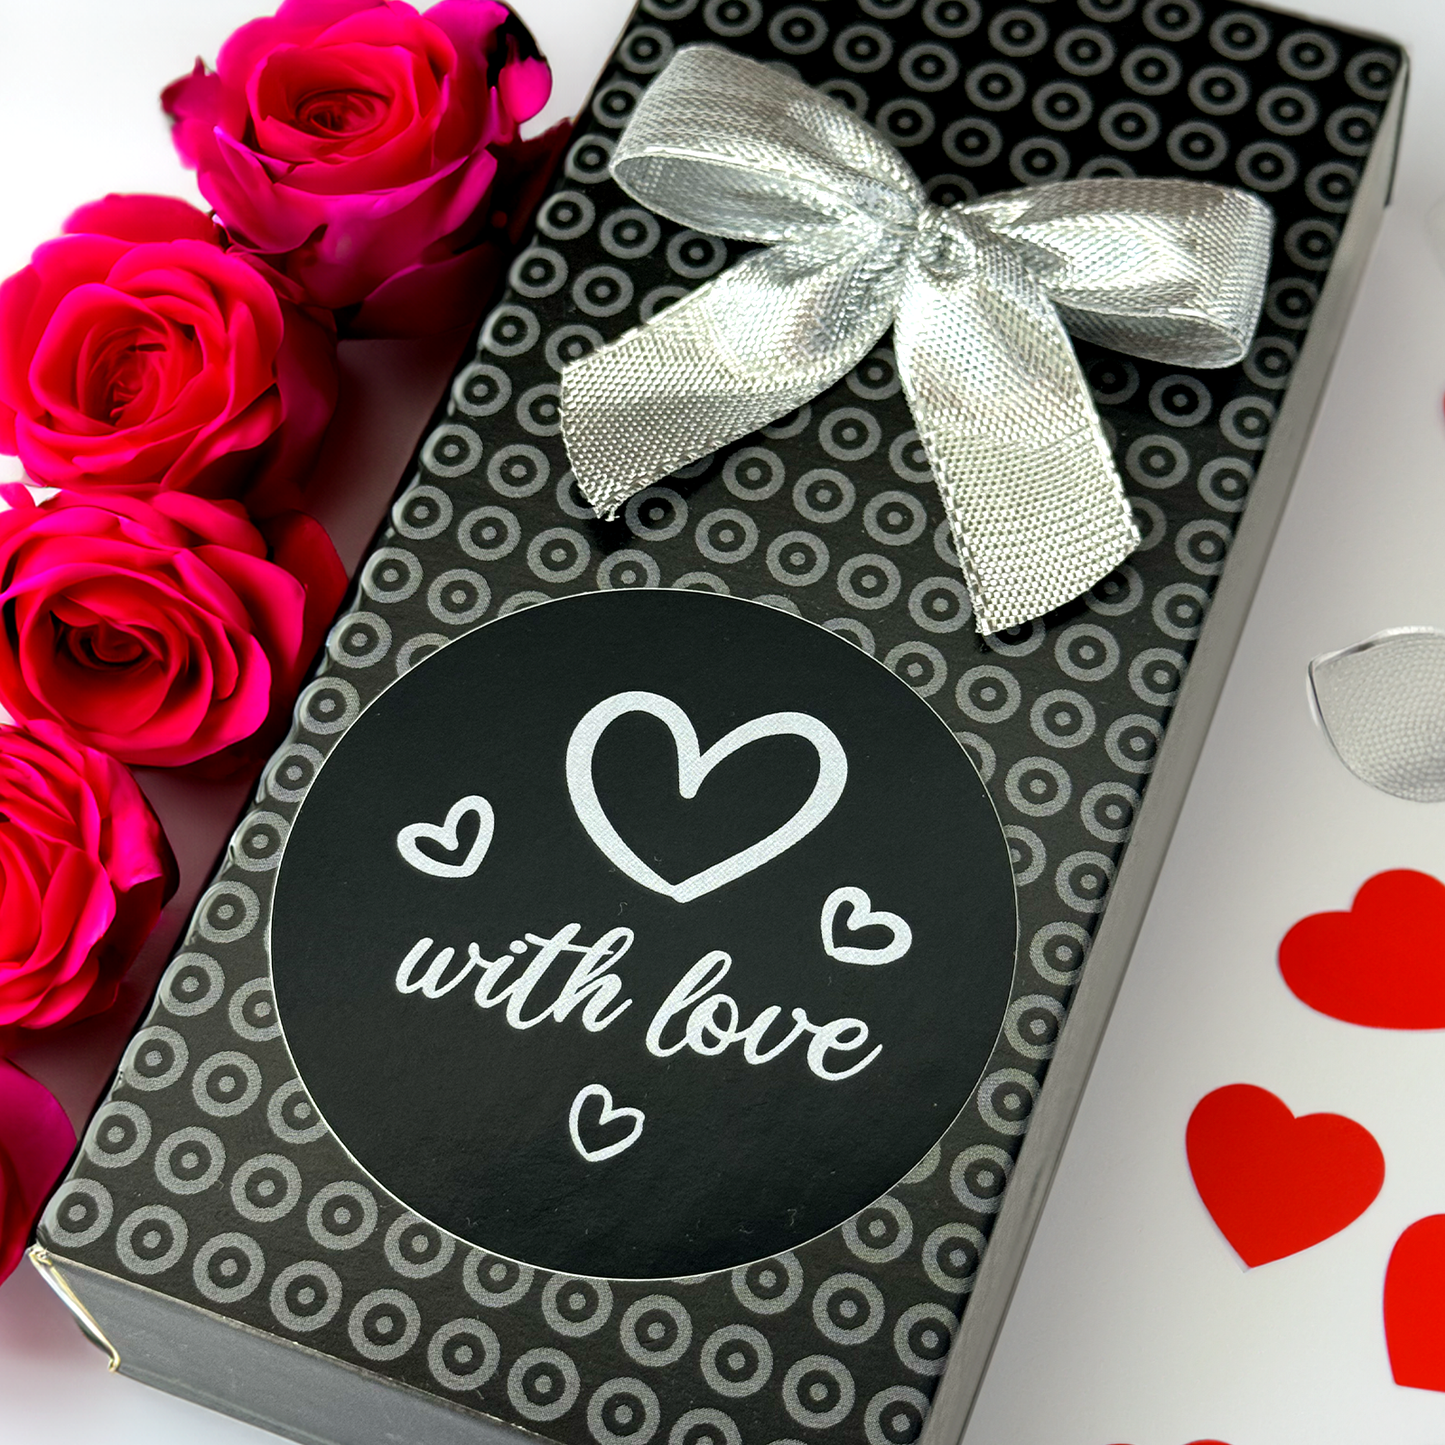 "with love" gift box